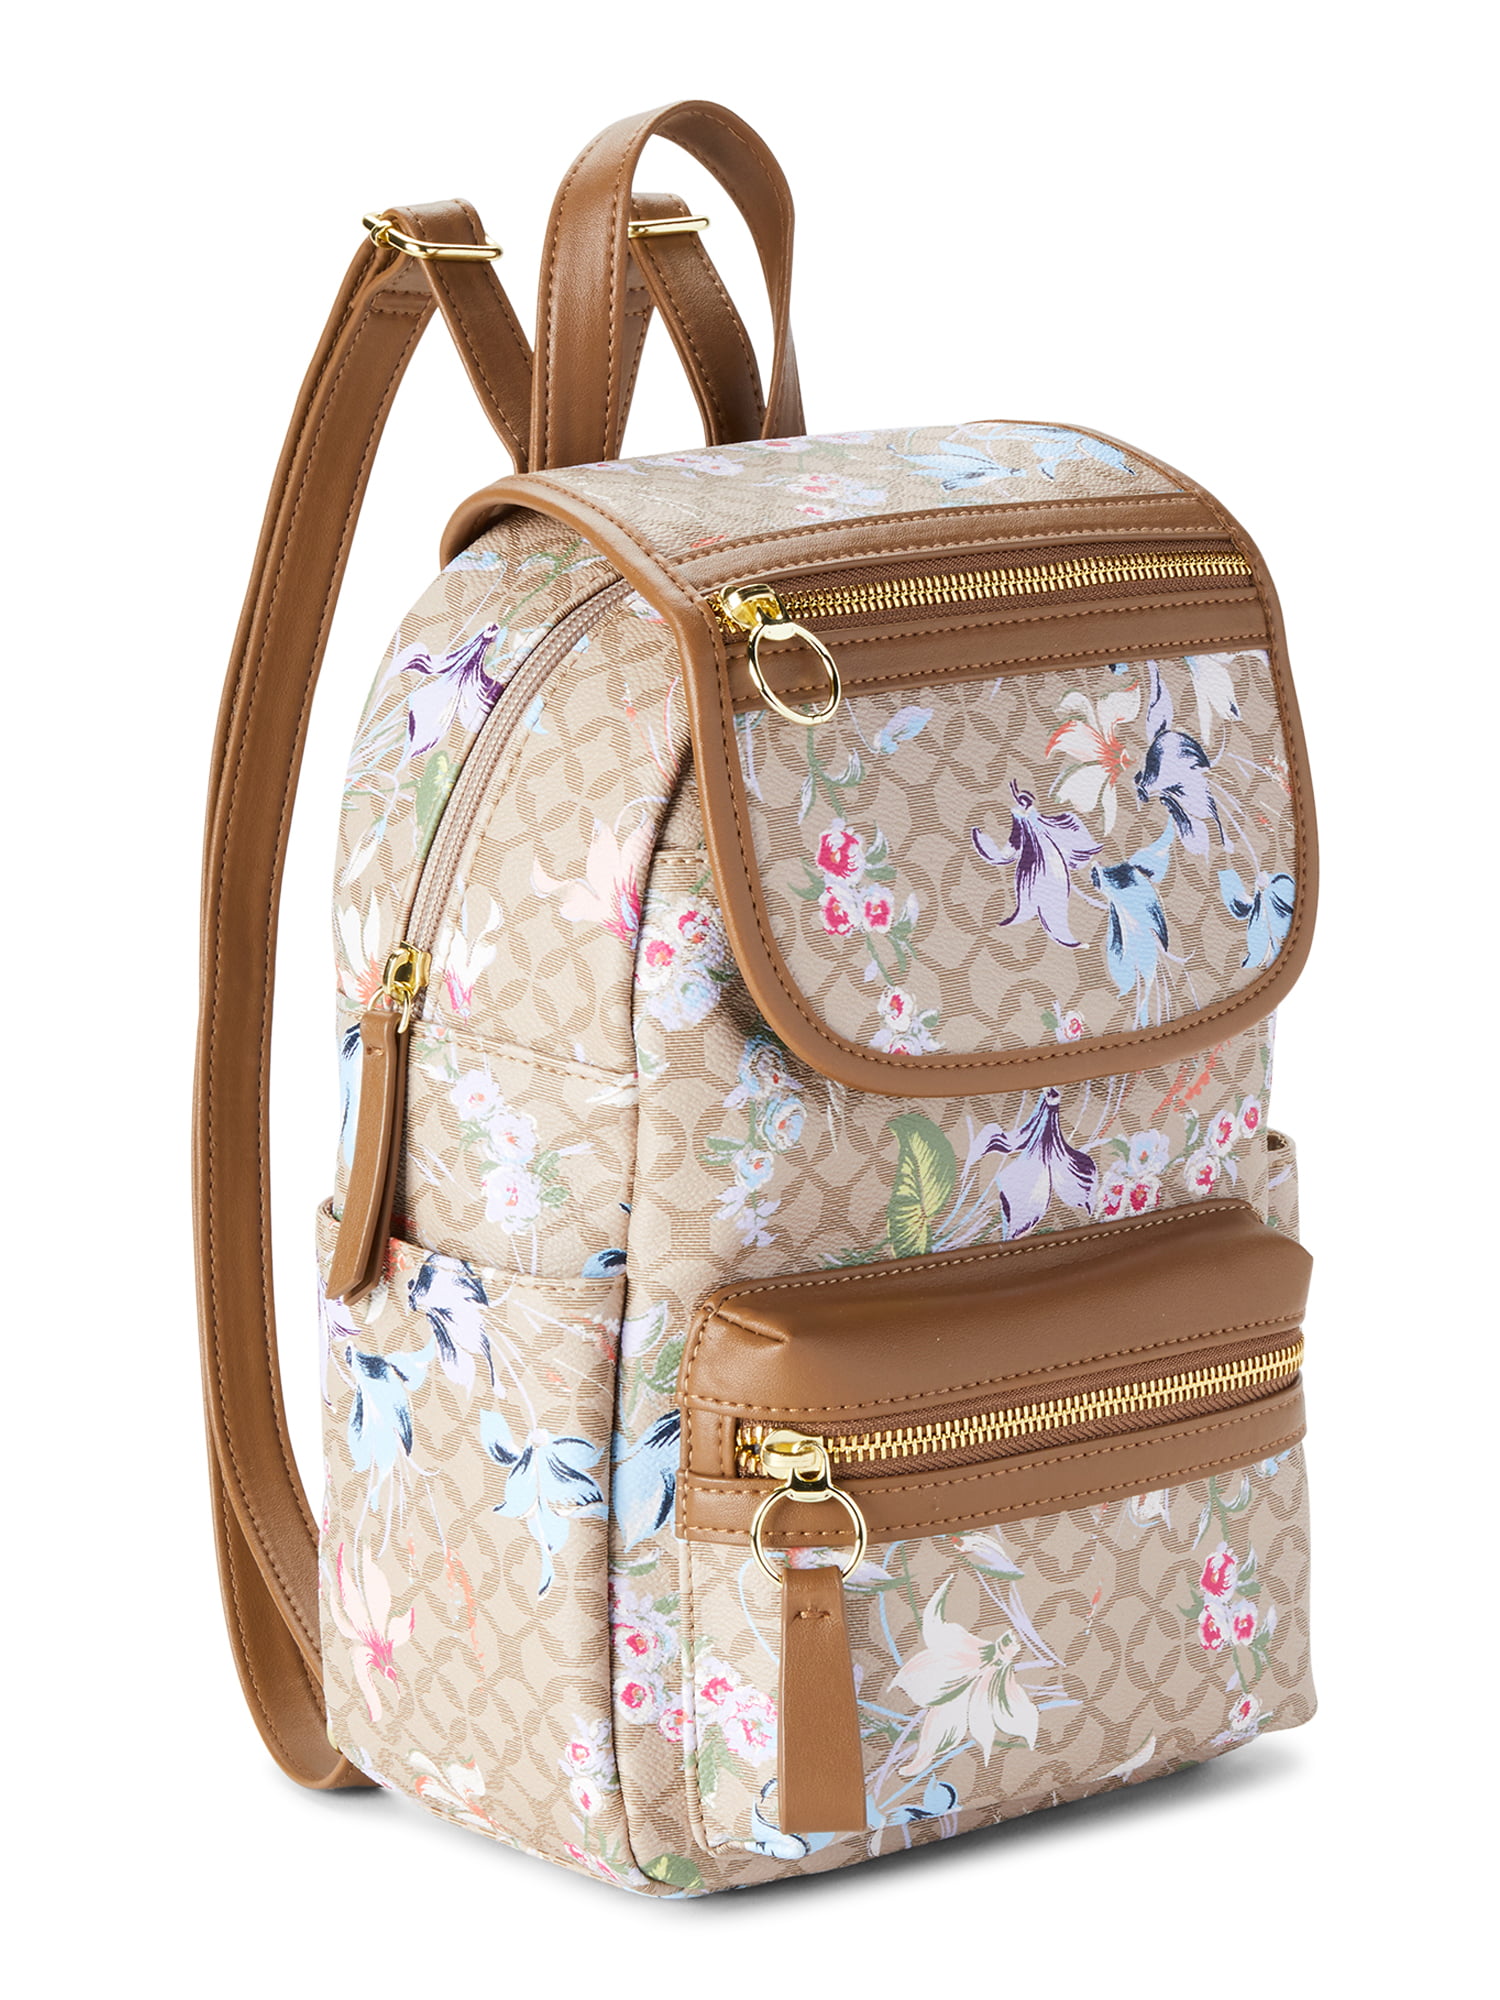 Time and Tru Women's Brown Faux Snake Fallon Backpack 